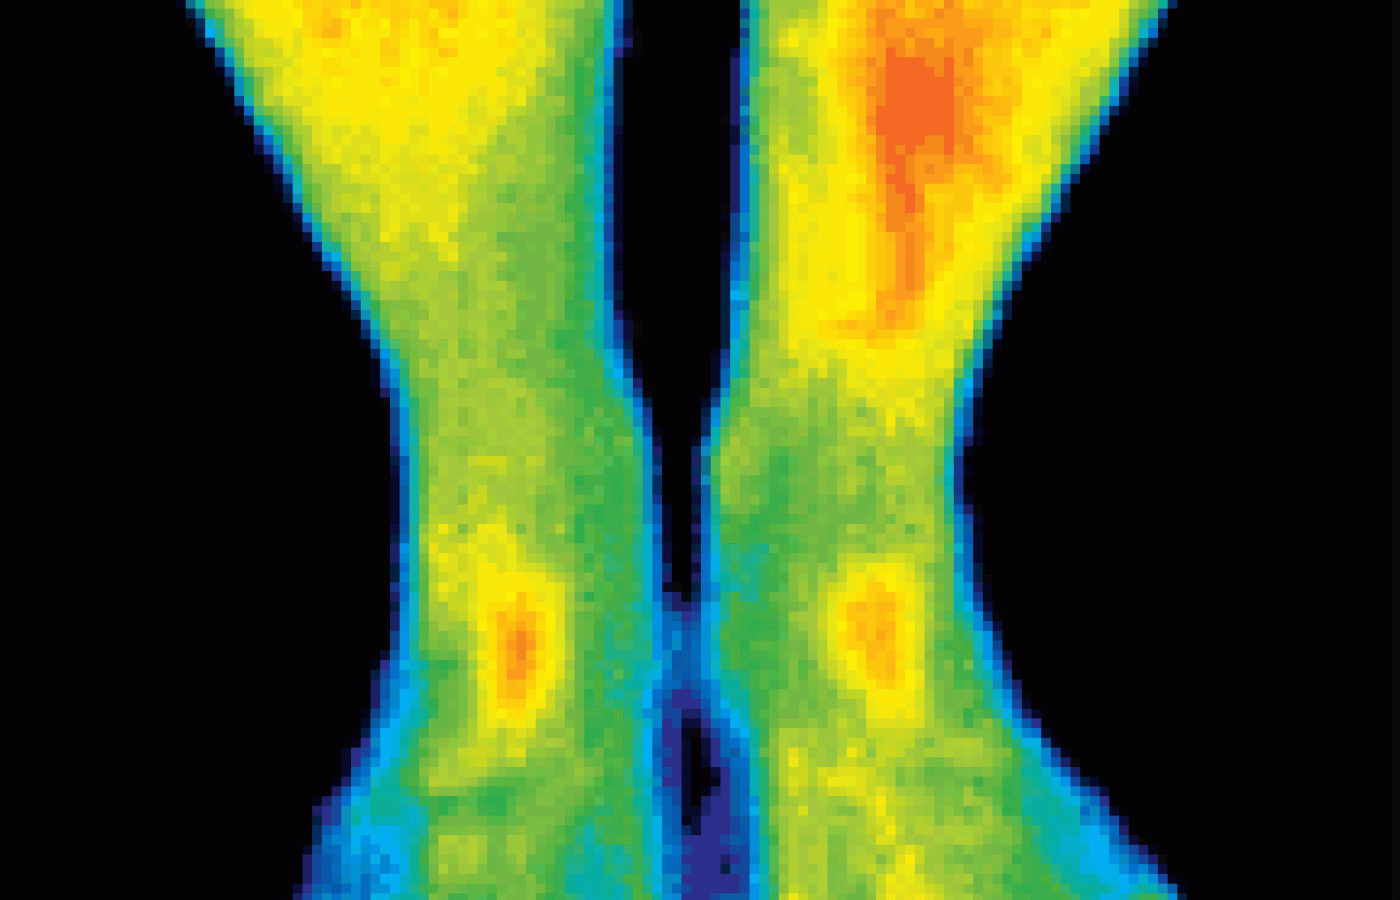 Infared image of lower legs and feet.